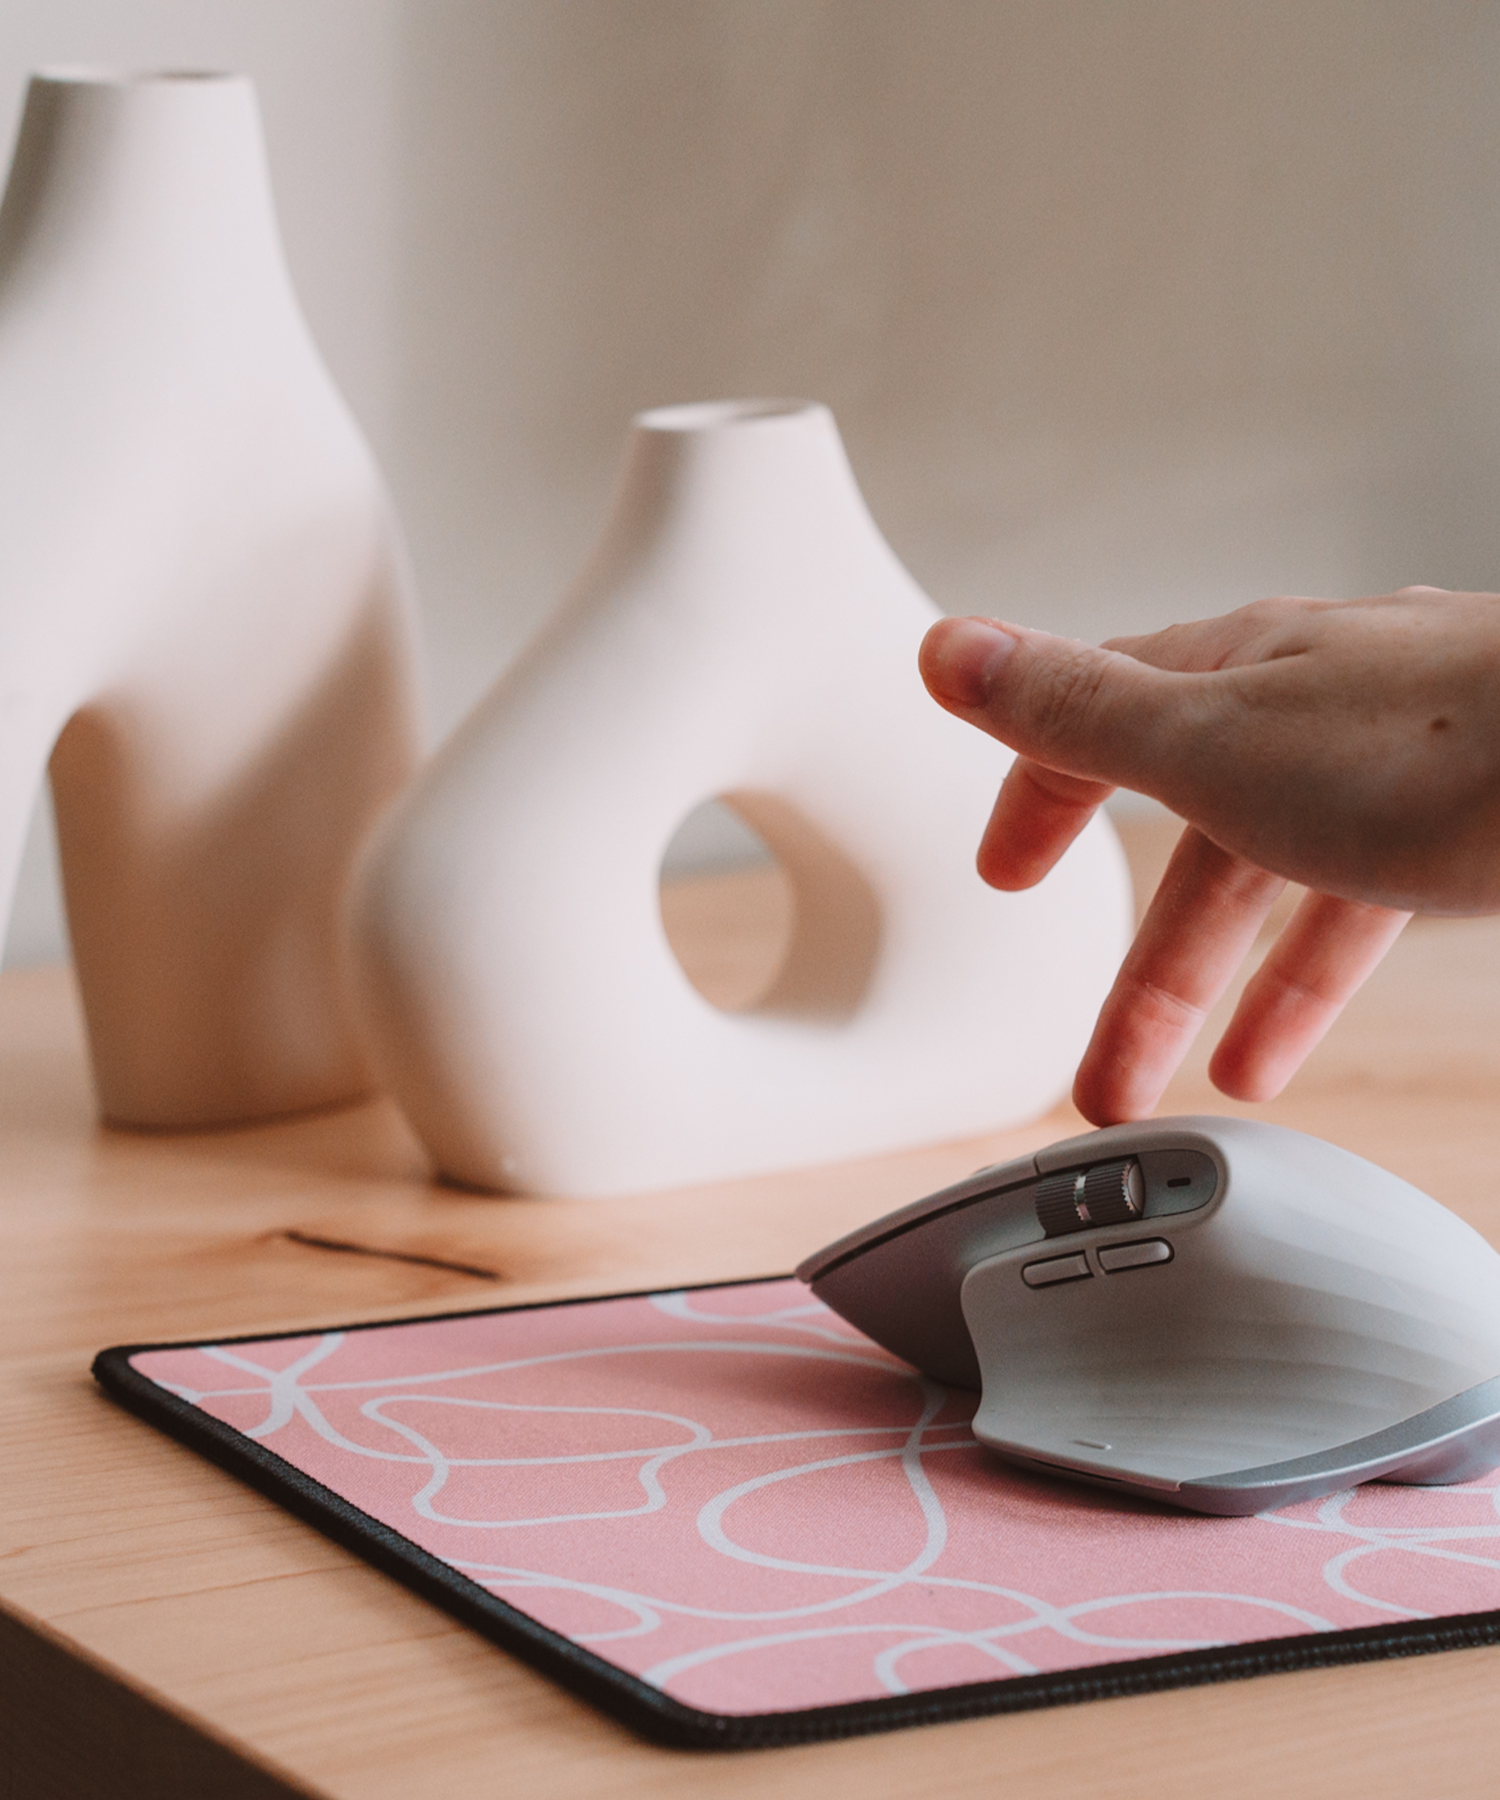 A hand reaching for a mouse on top of the Terrain mousepad. In the background are two asymmetrical vases.